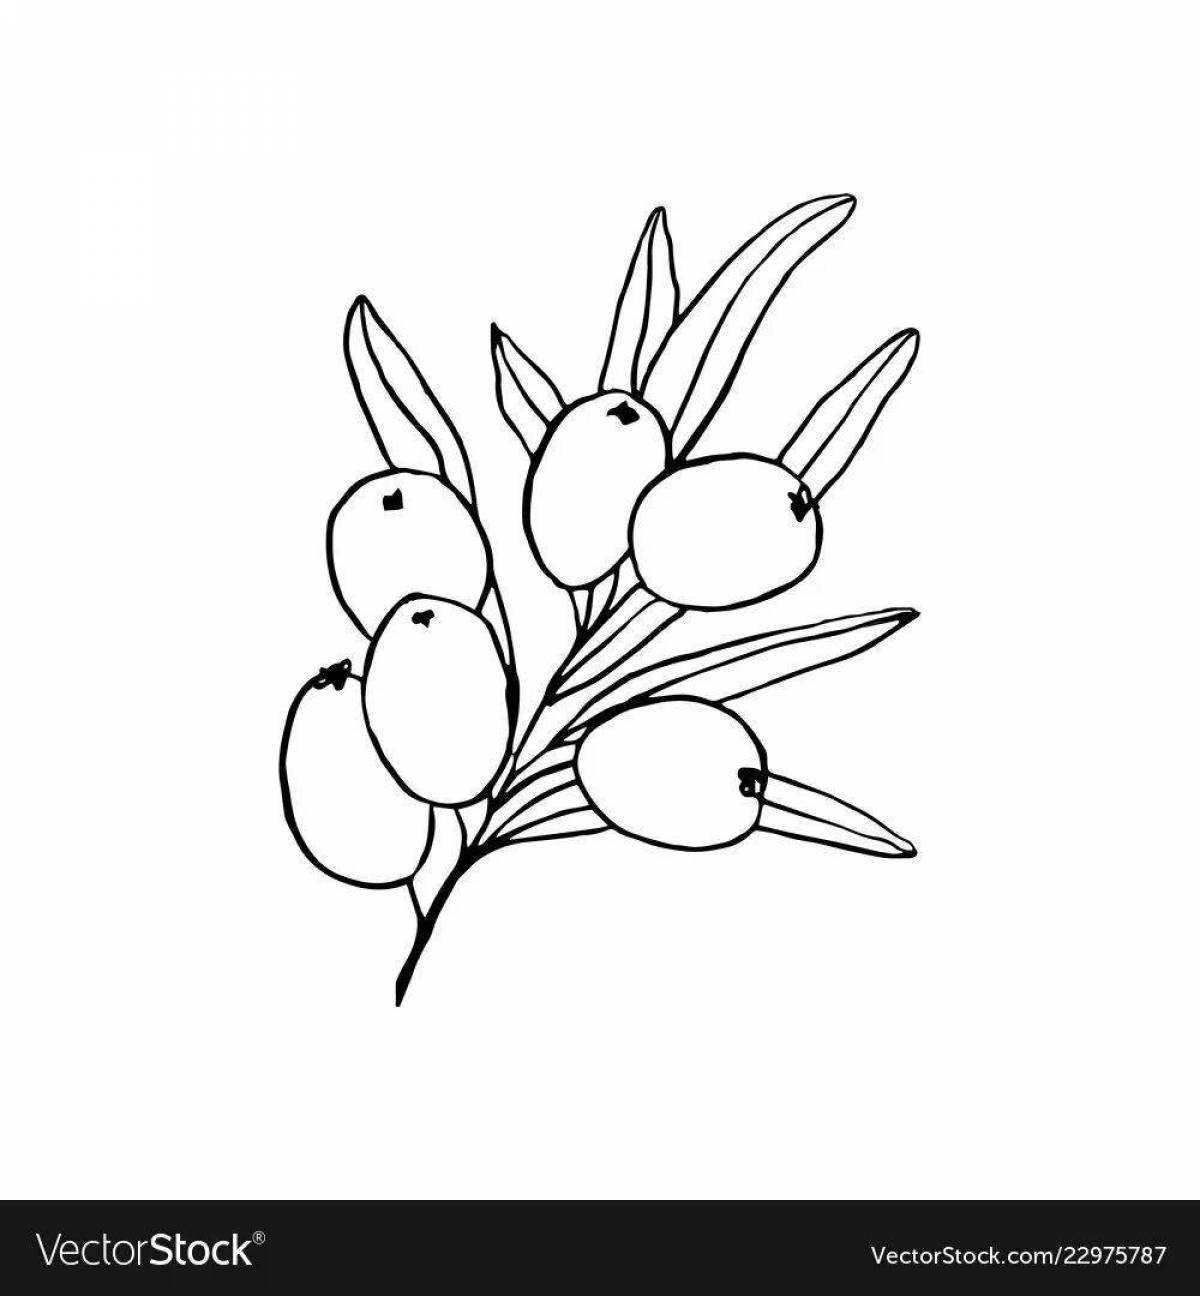 Great sea buckthorn coloring book for kids